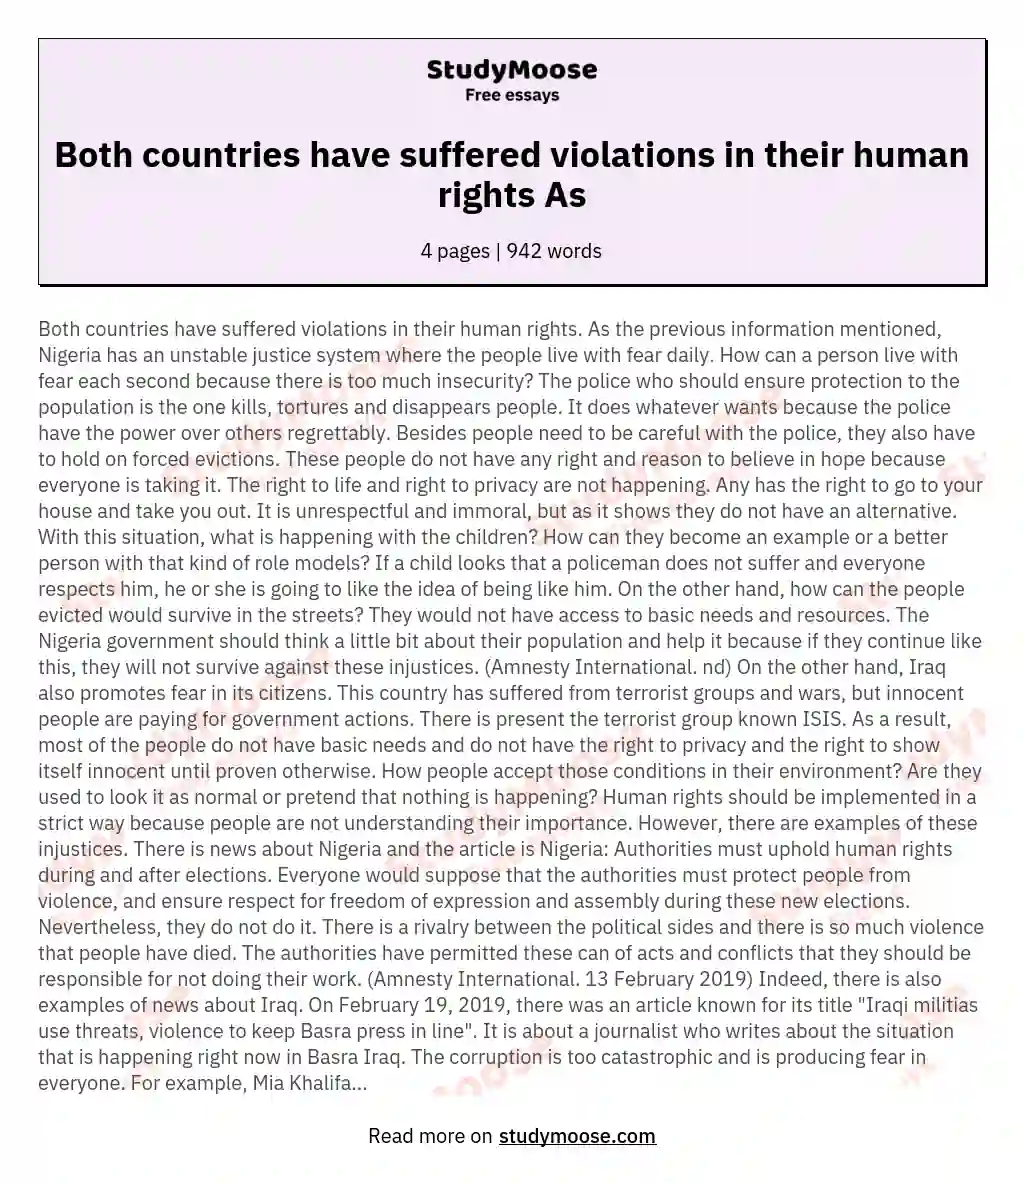 Both countries have suffered violations in their human rights As essay